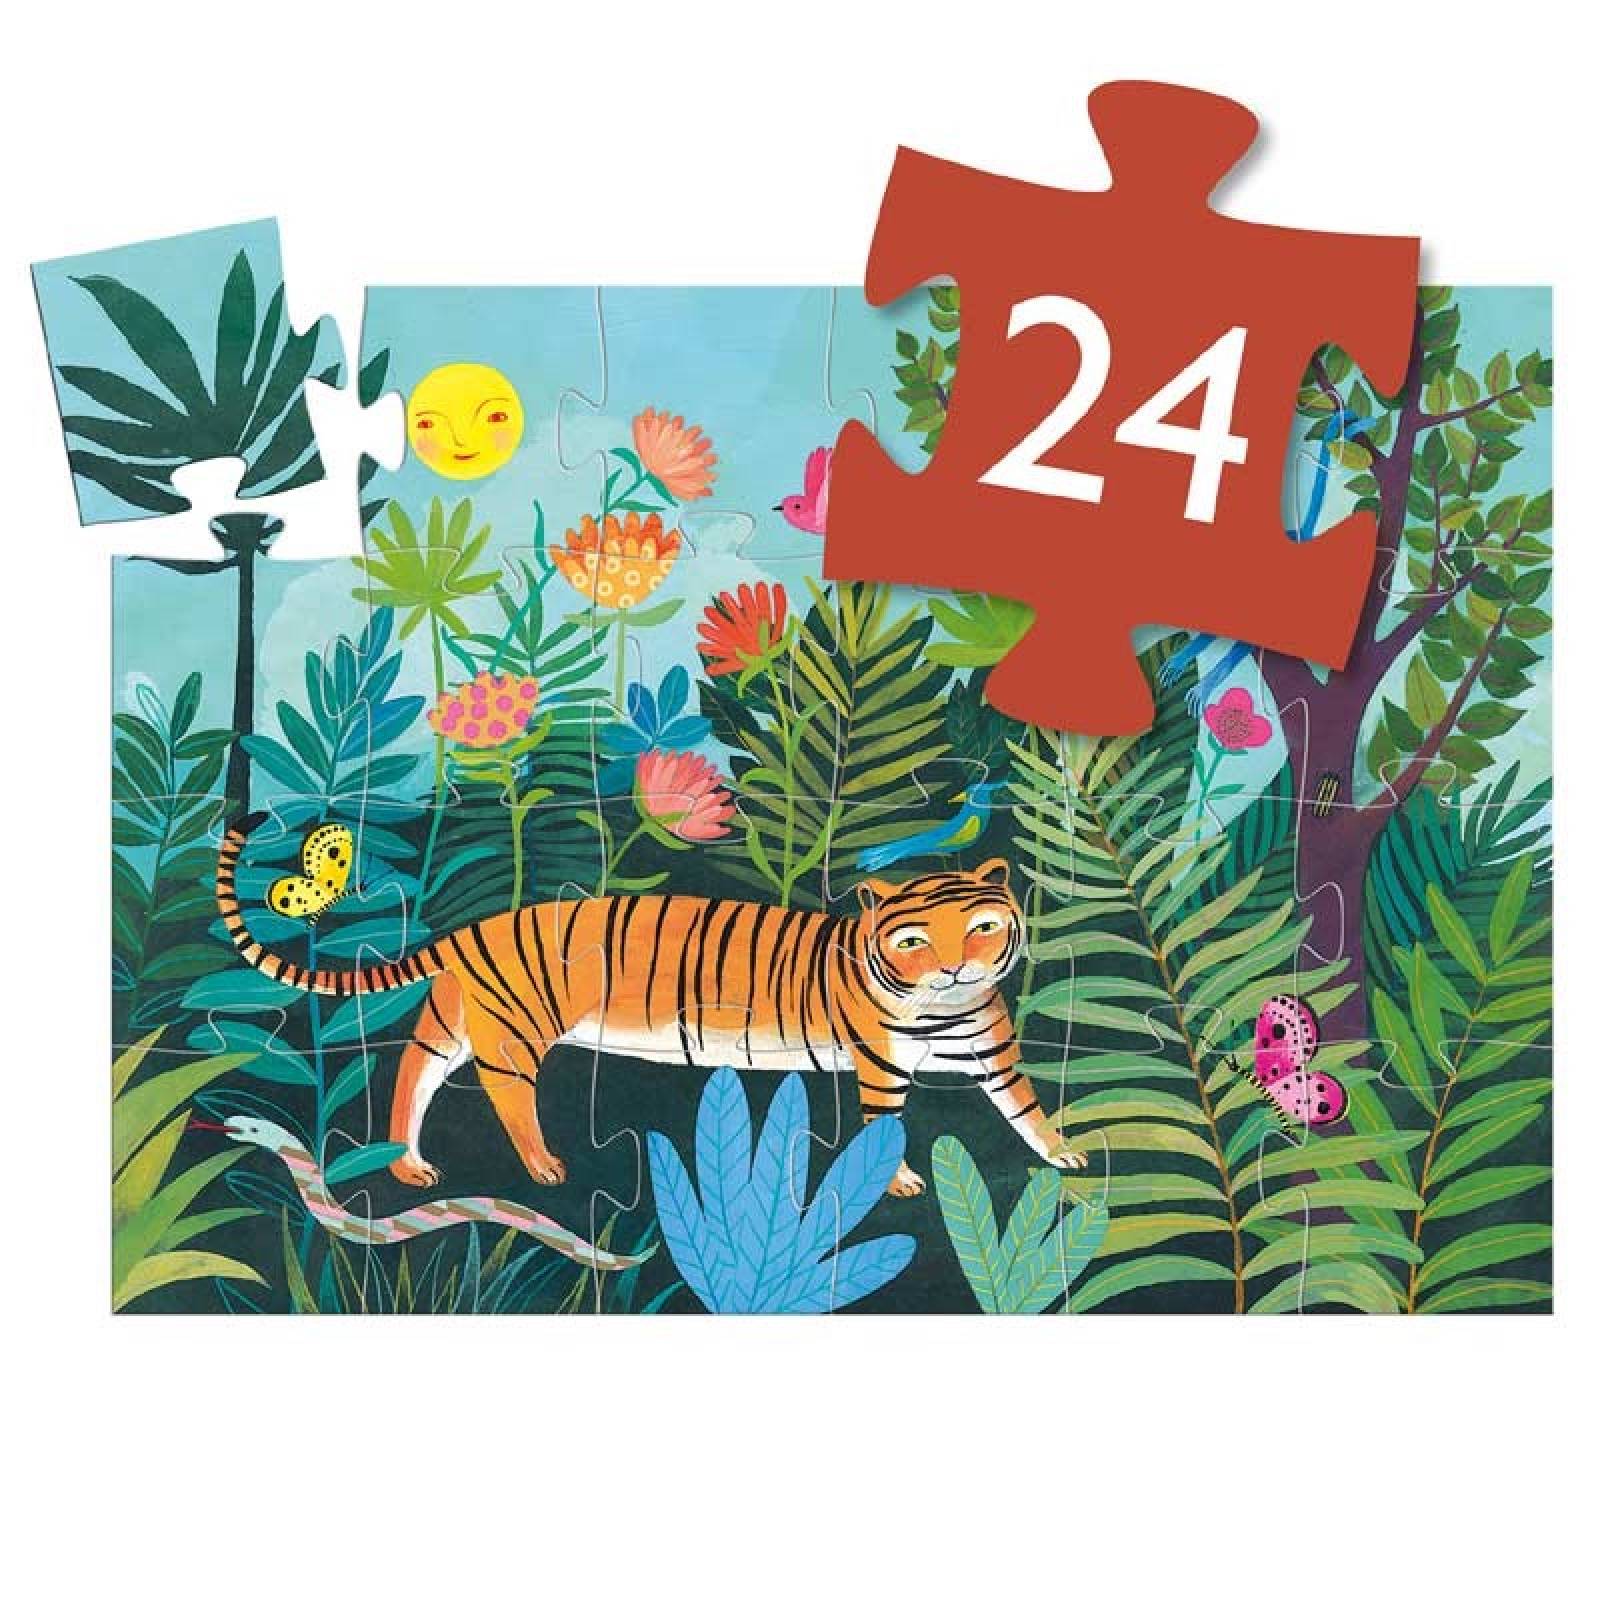 The Tiger's Wallk - 24 Piece Jigsaw Puzzle By Djeco 3+ thumbnails